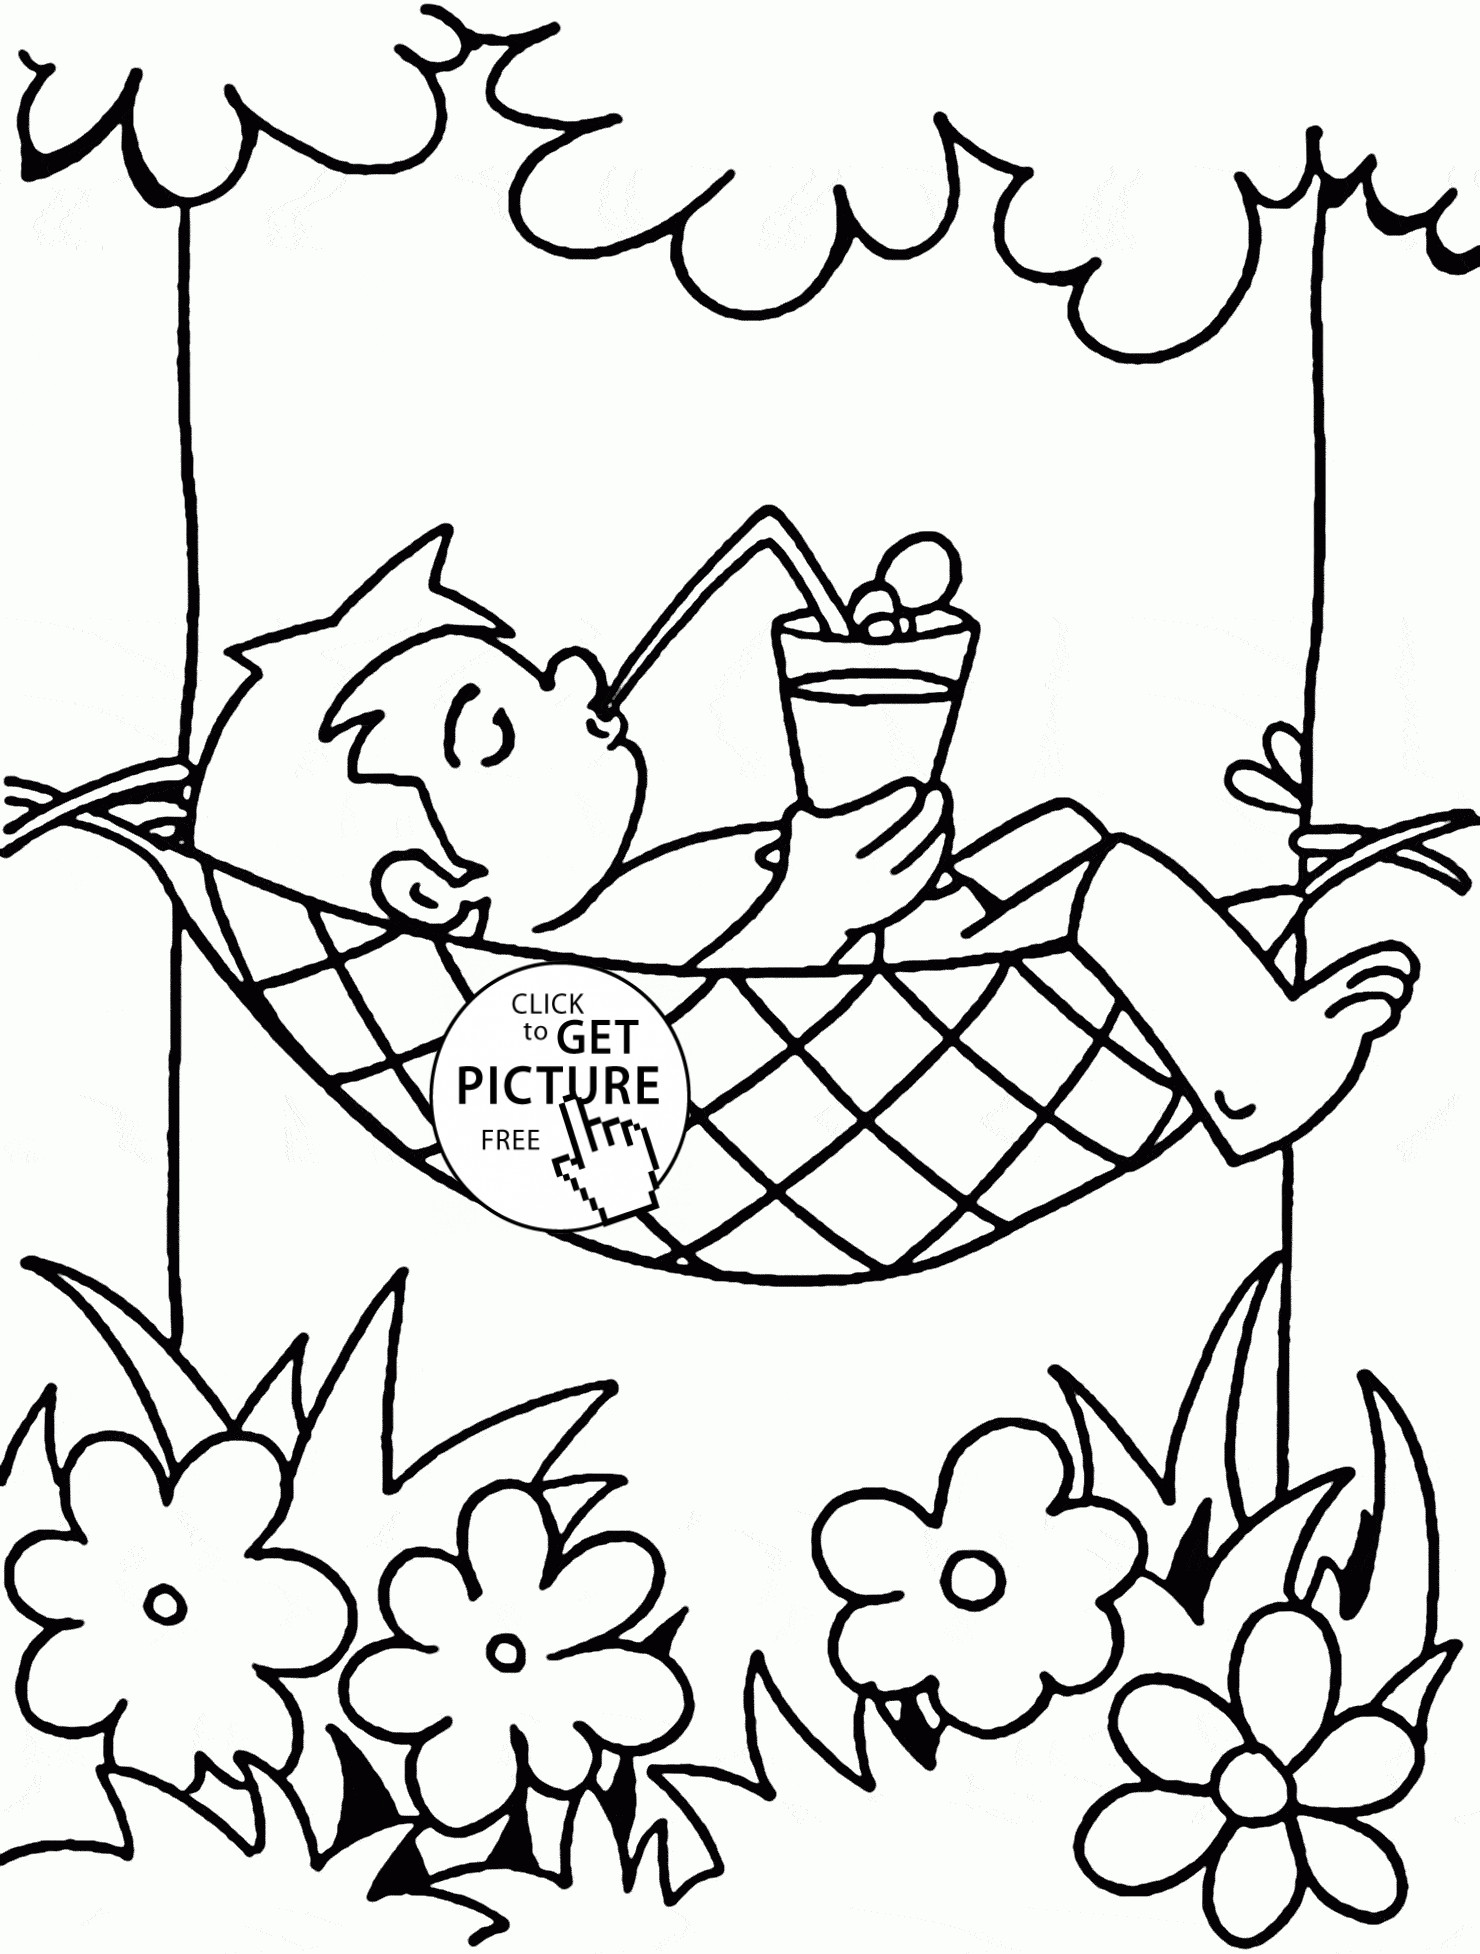 Summer Coloring Sheets For Kids
 Vacation in Summertime coloring page for kids seasons